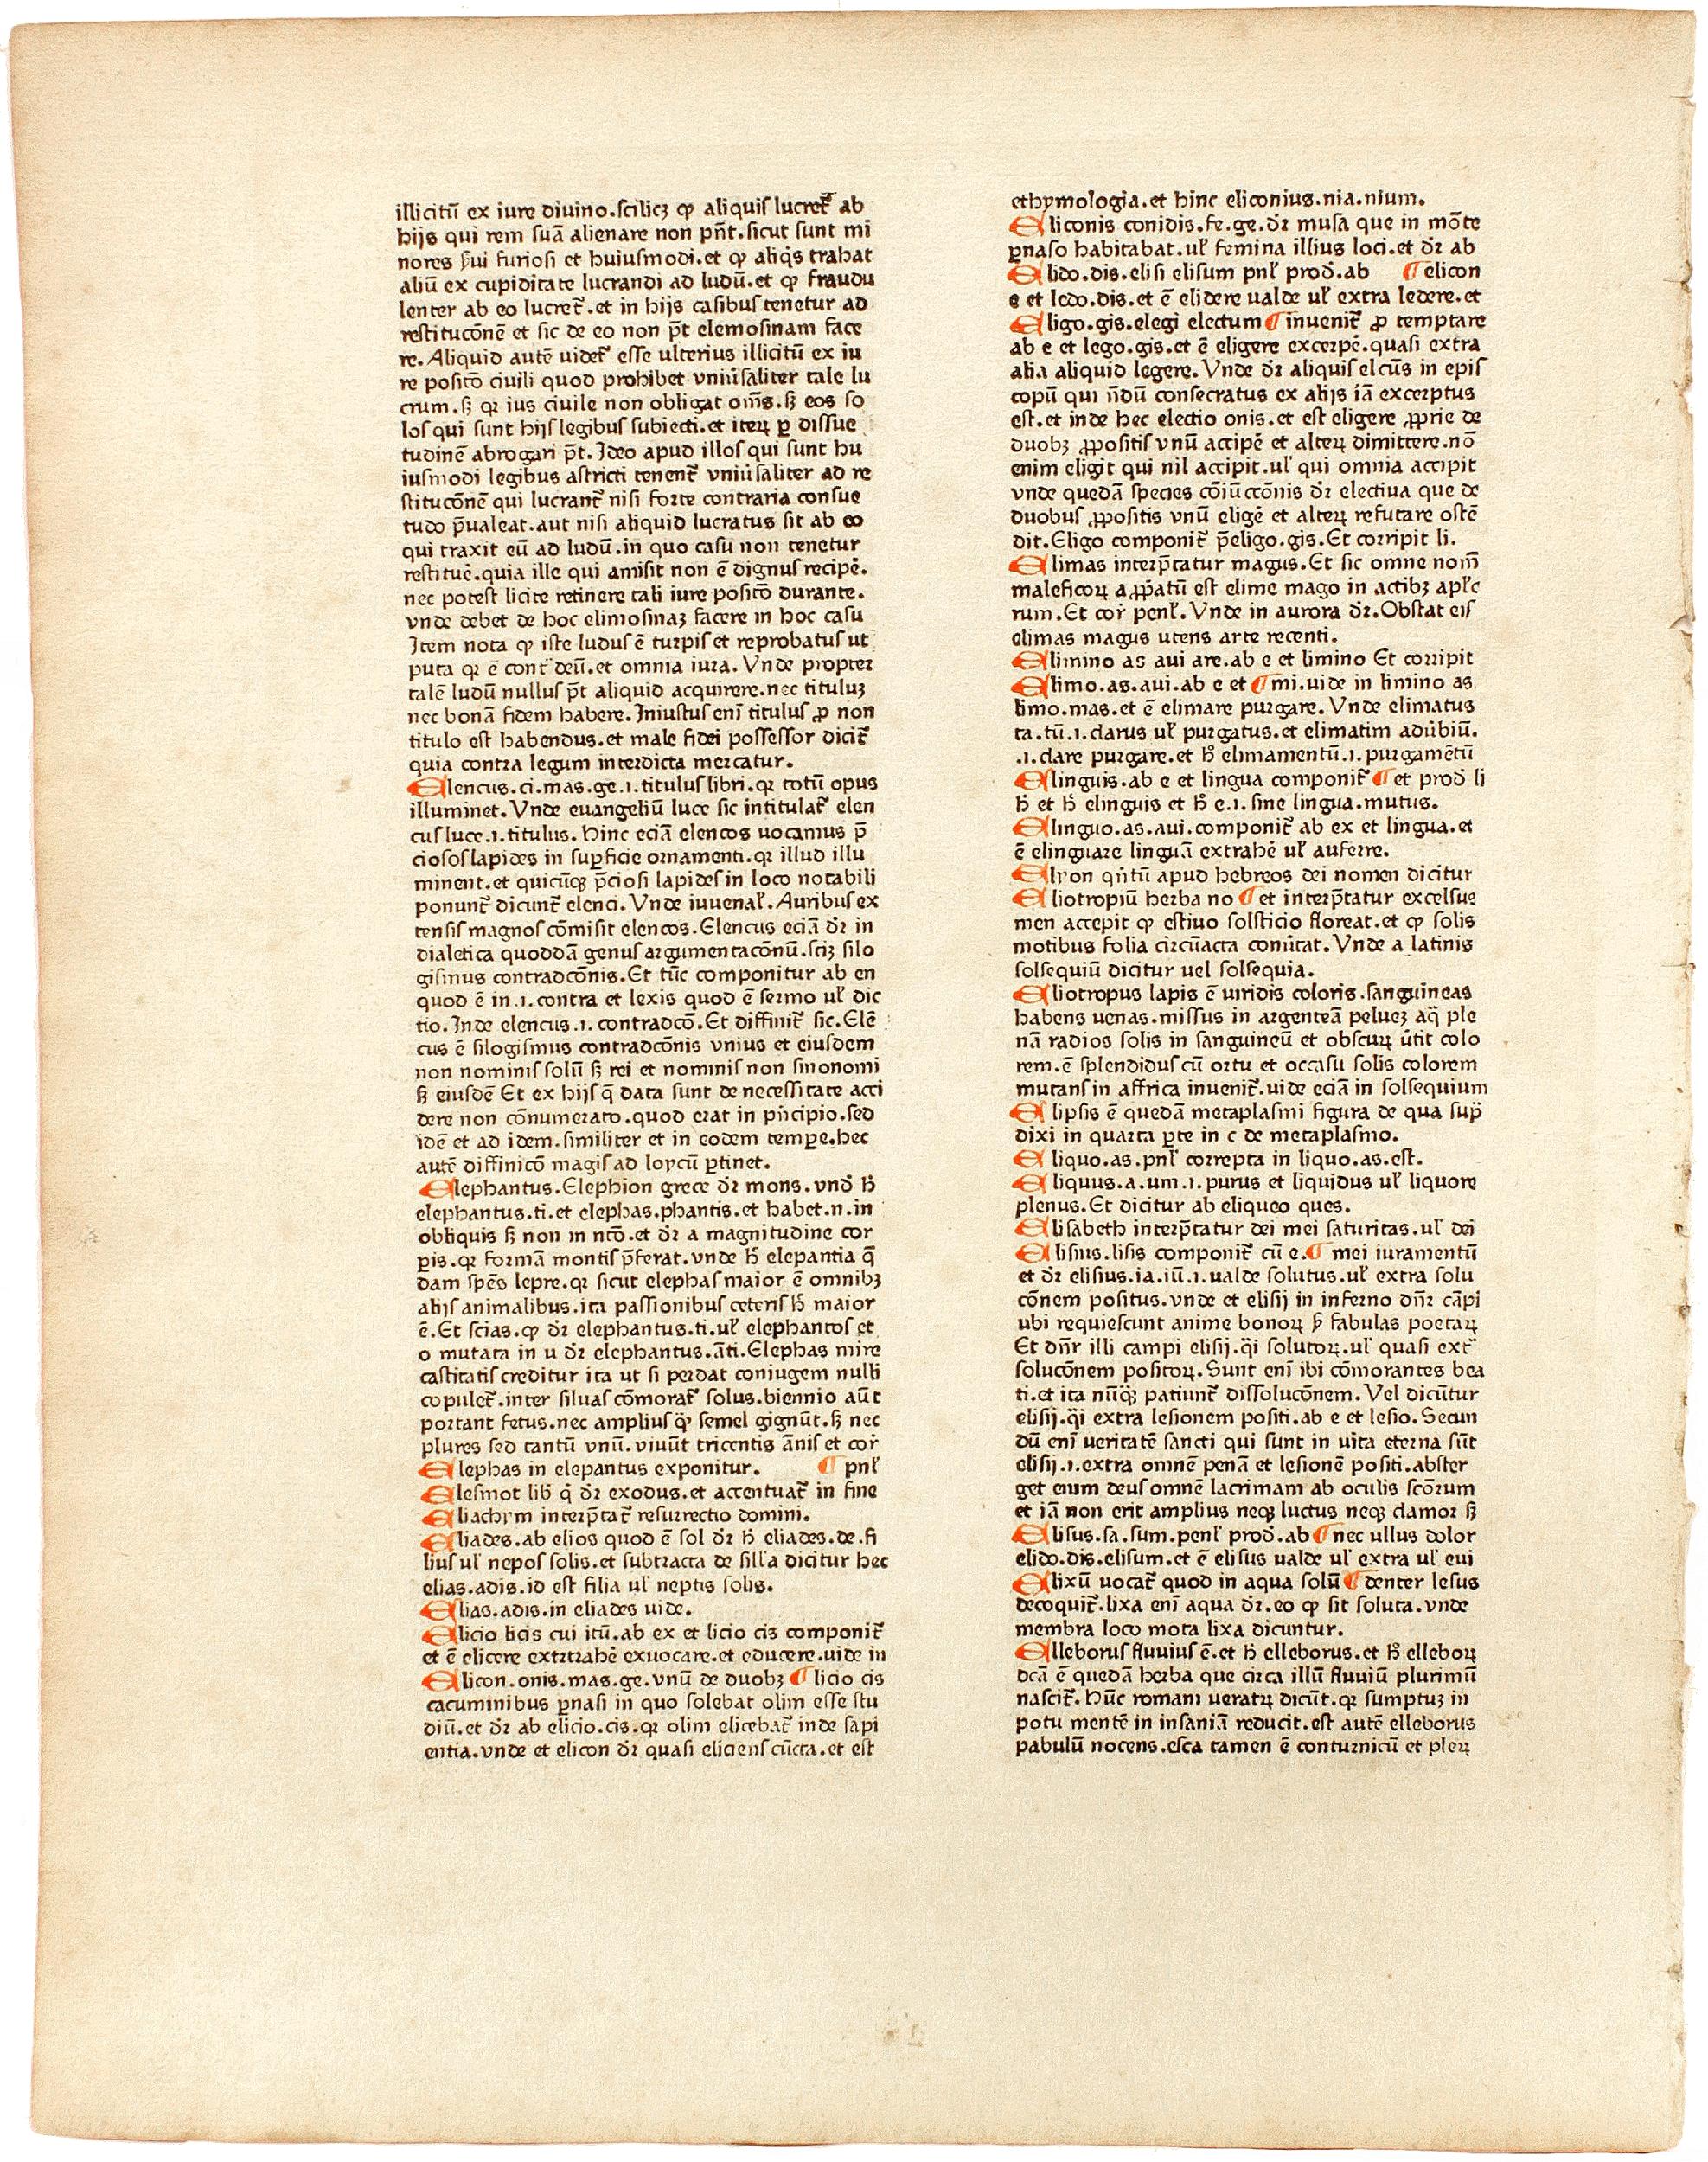 Author:: Balbus, Johannes. 

Title: Catholicon. (An original leaf).

Publisher: Mainz: [Peter Schoeffer], 1469.

Description: An Original Catholicon Leaf Printed By Peter Schoeffer. 36.5 cm x 28.5 cm, printed in double columns with 66 lines to the